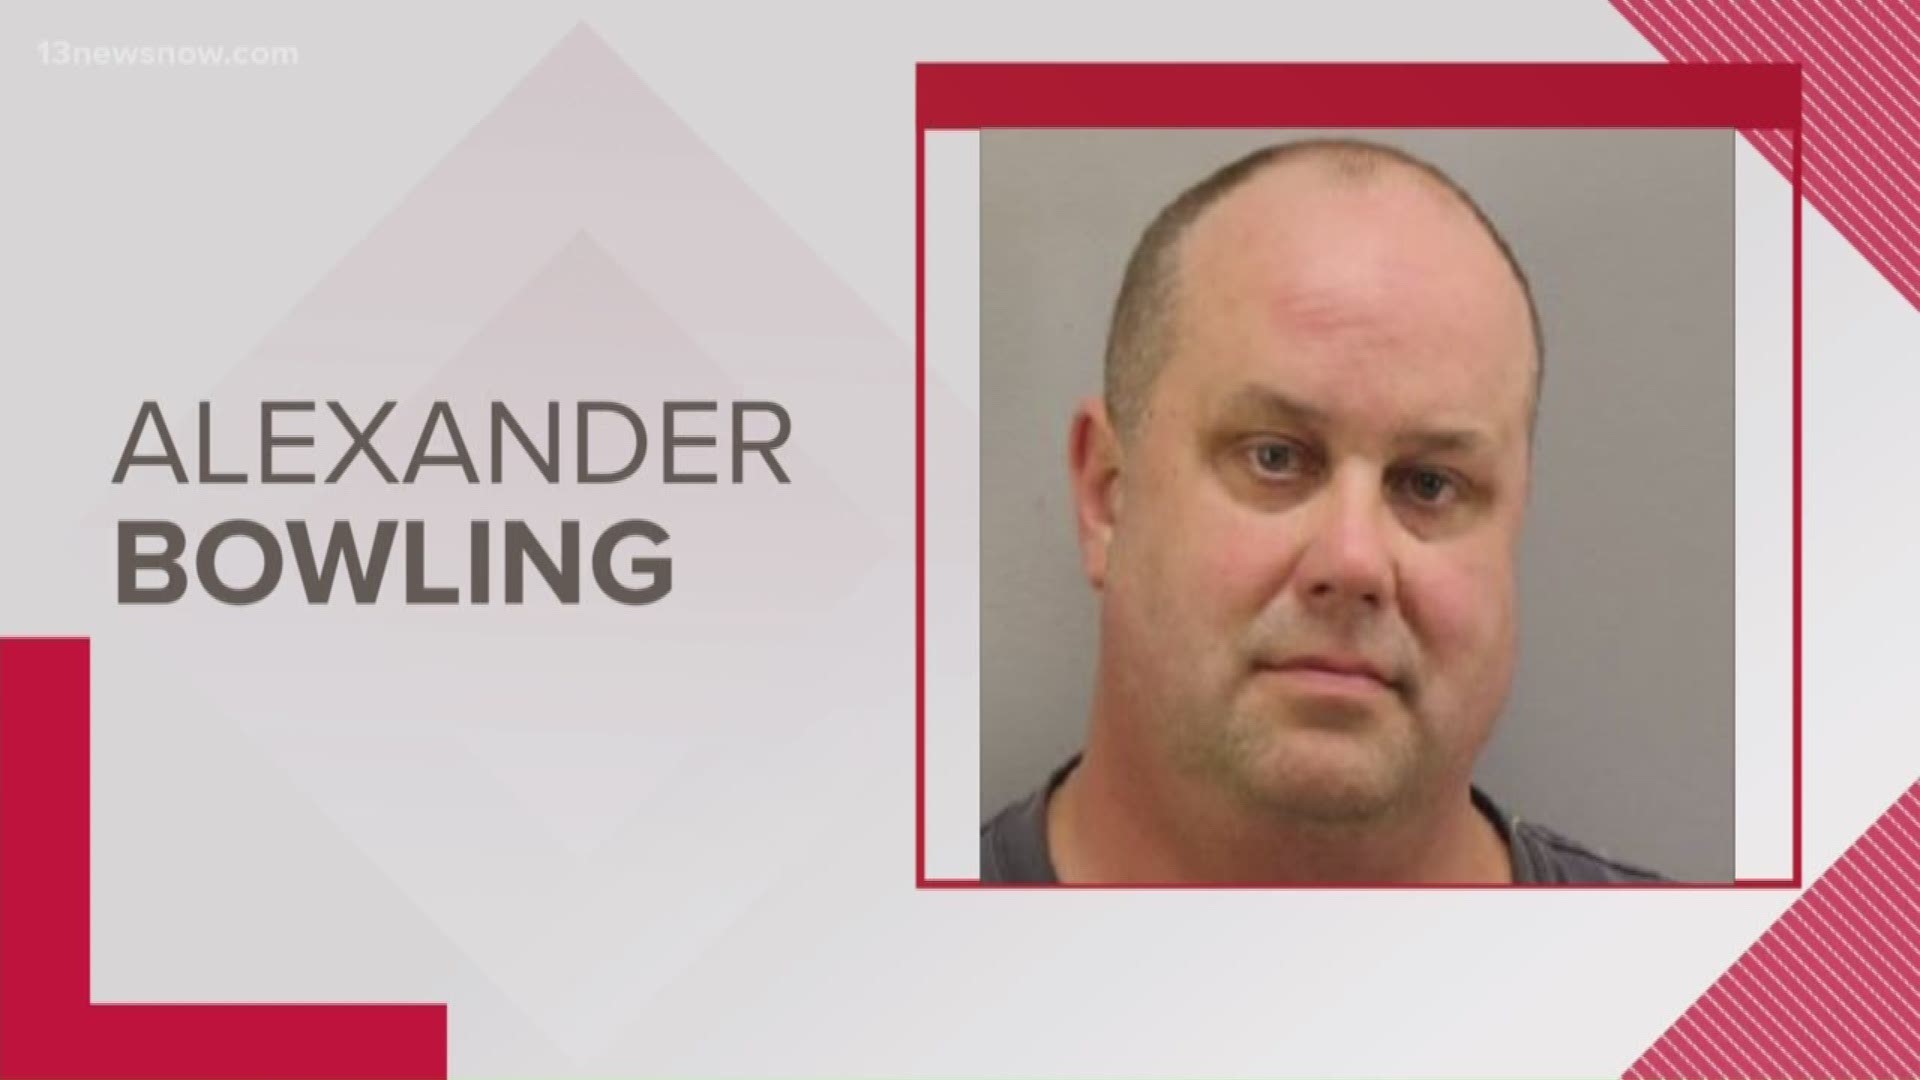 Alexander Bowling was arrested for multiple counts of possession of child pornography. He works for a subsidiary of Sentara Healthcare but is on leave right now.